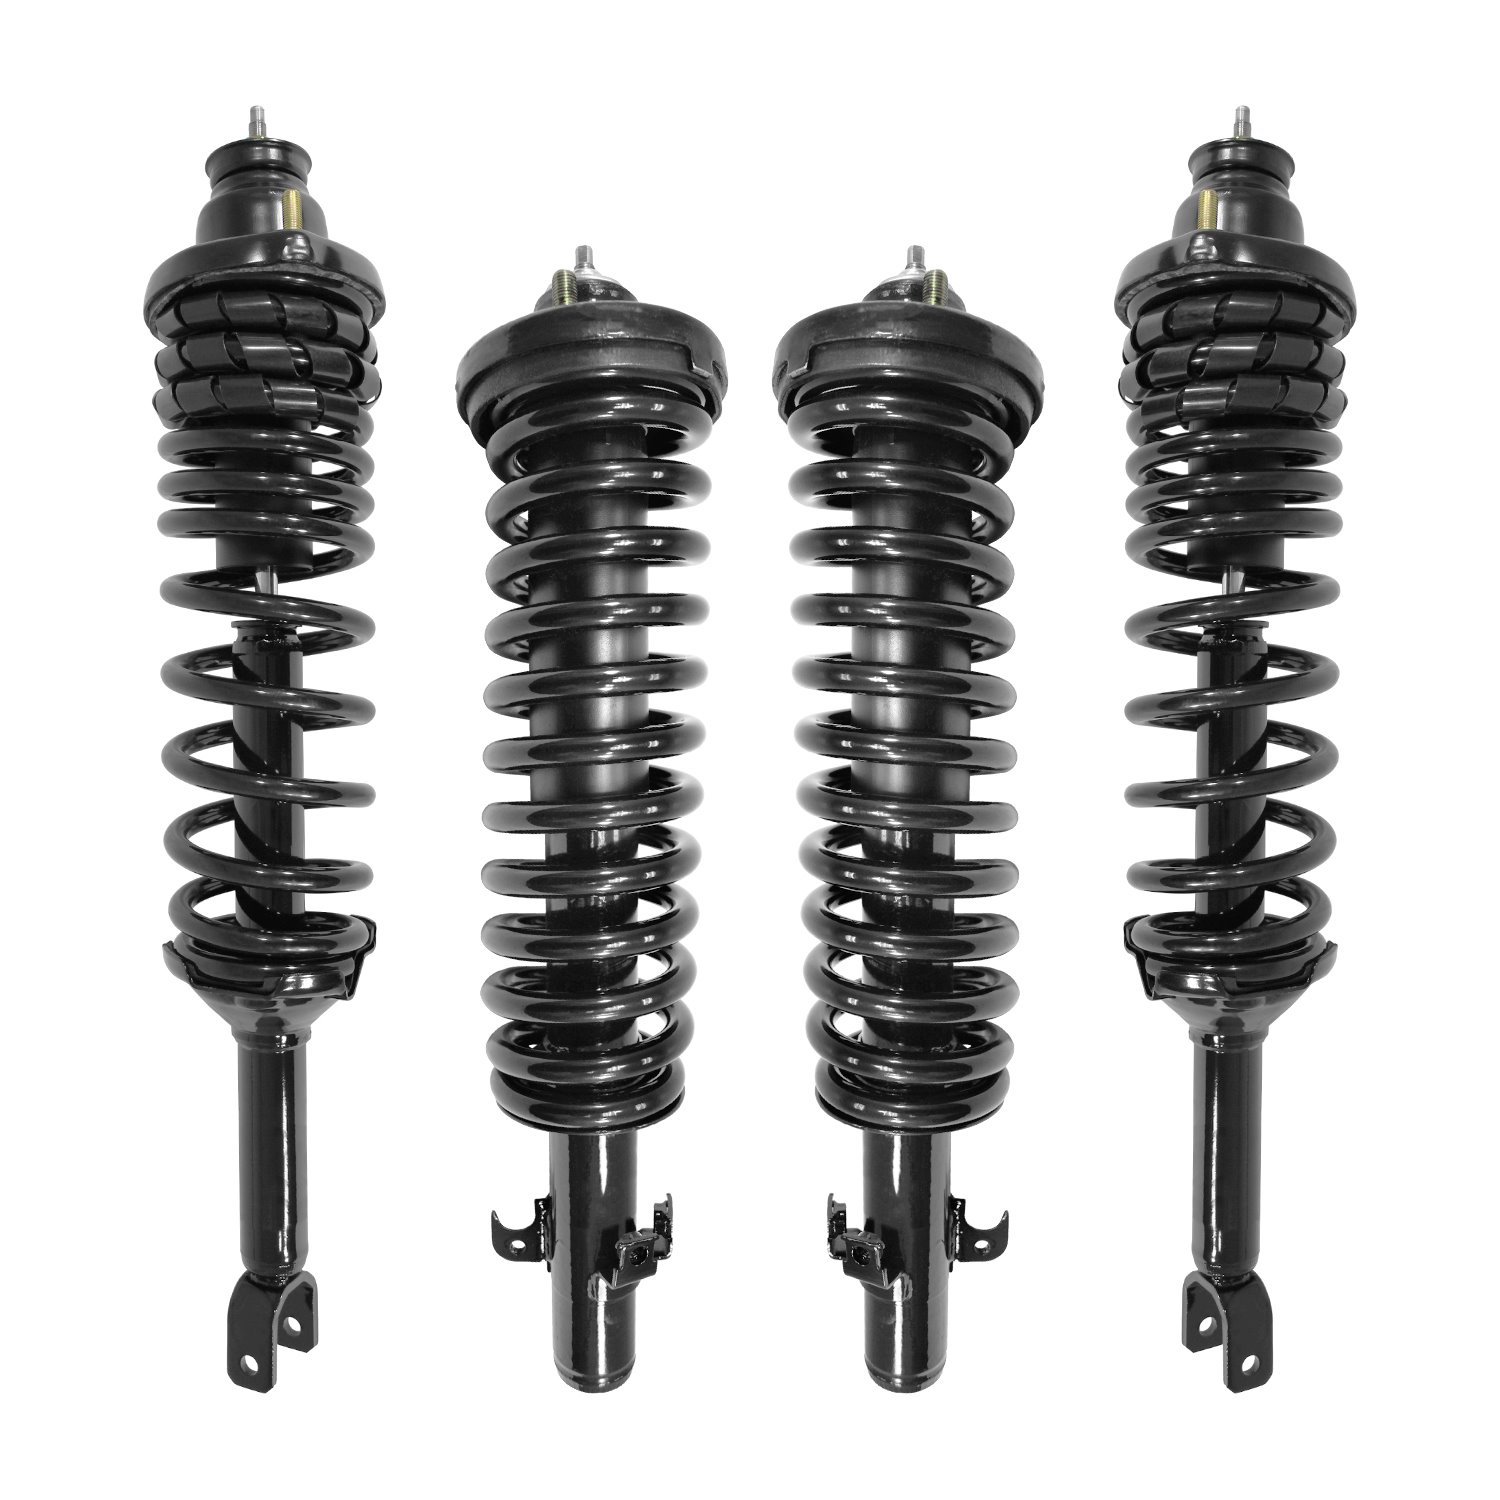 4-11144-15141-001 Front & Rear Suspension Strut & Coil Spring Assembly Kit Fits Select Acura CL